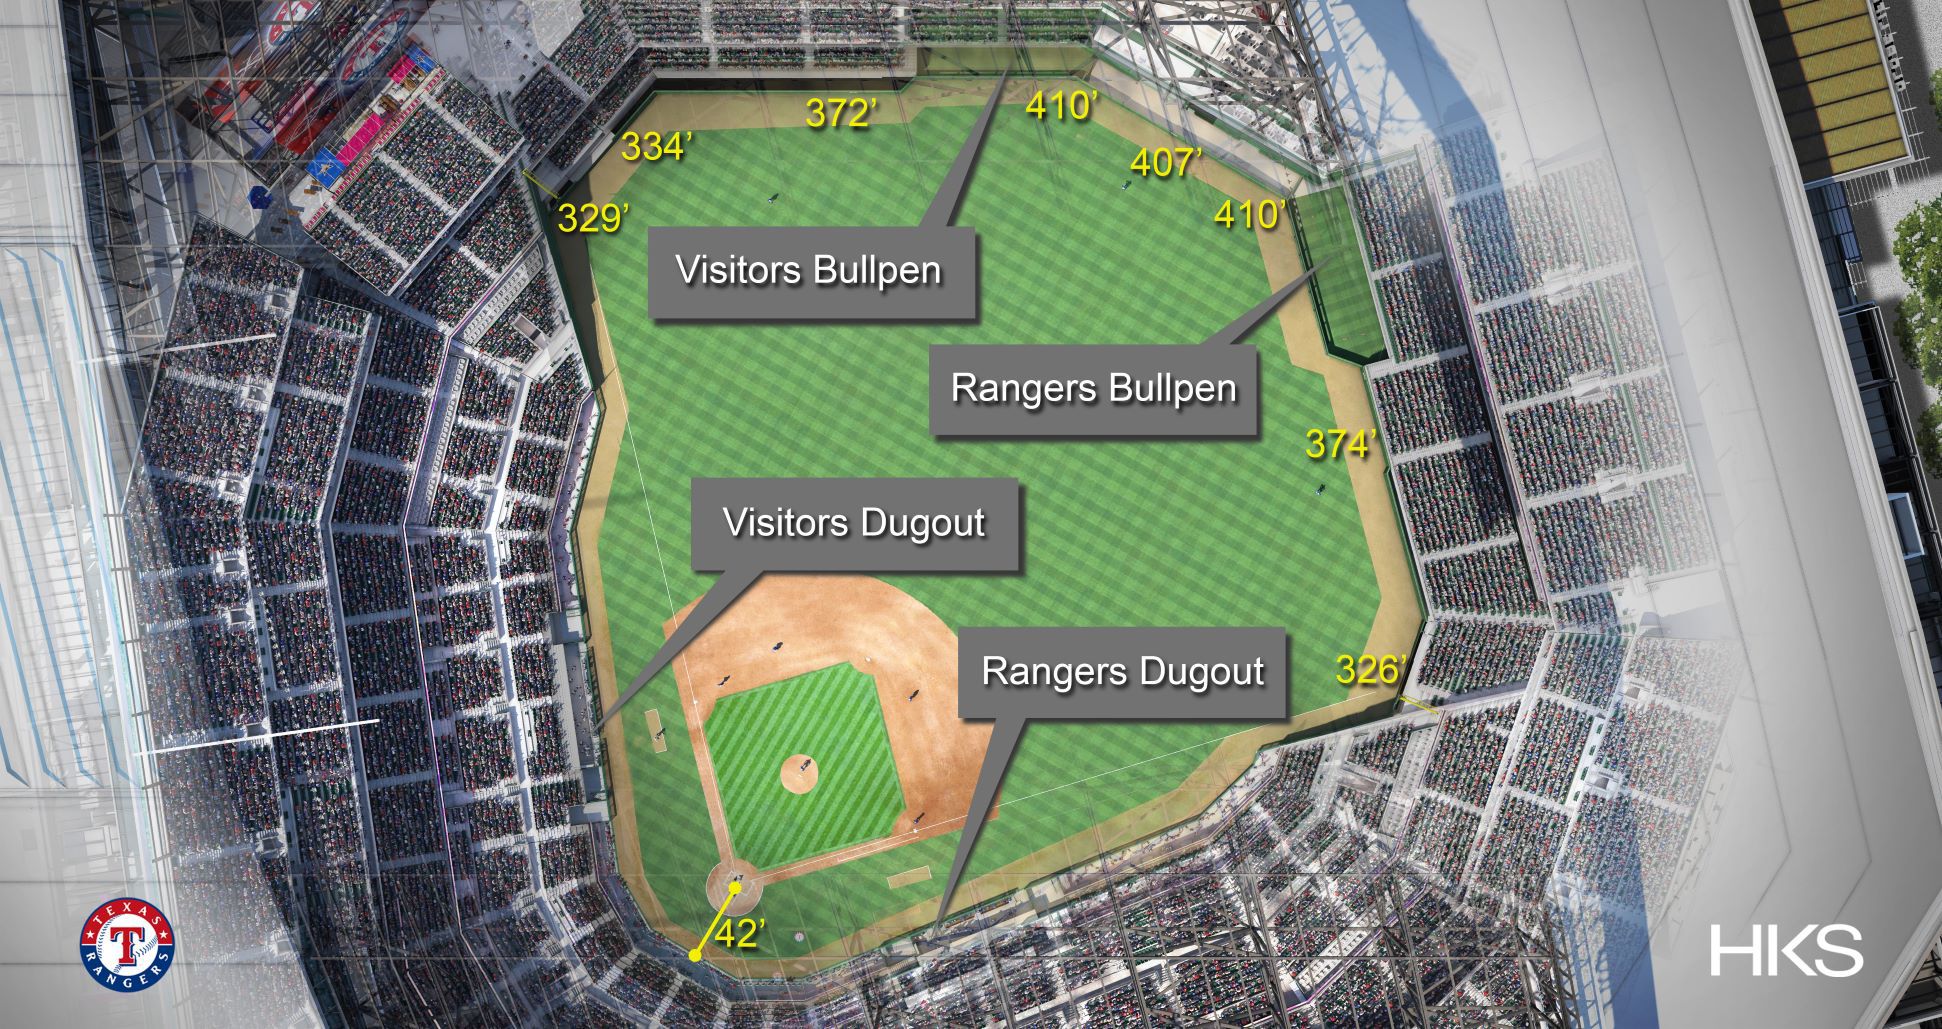 The Texas Rangers' new ballpark is a major improvement — if only